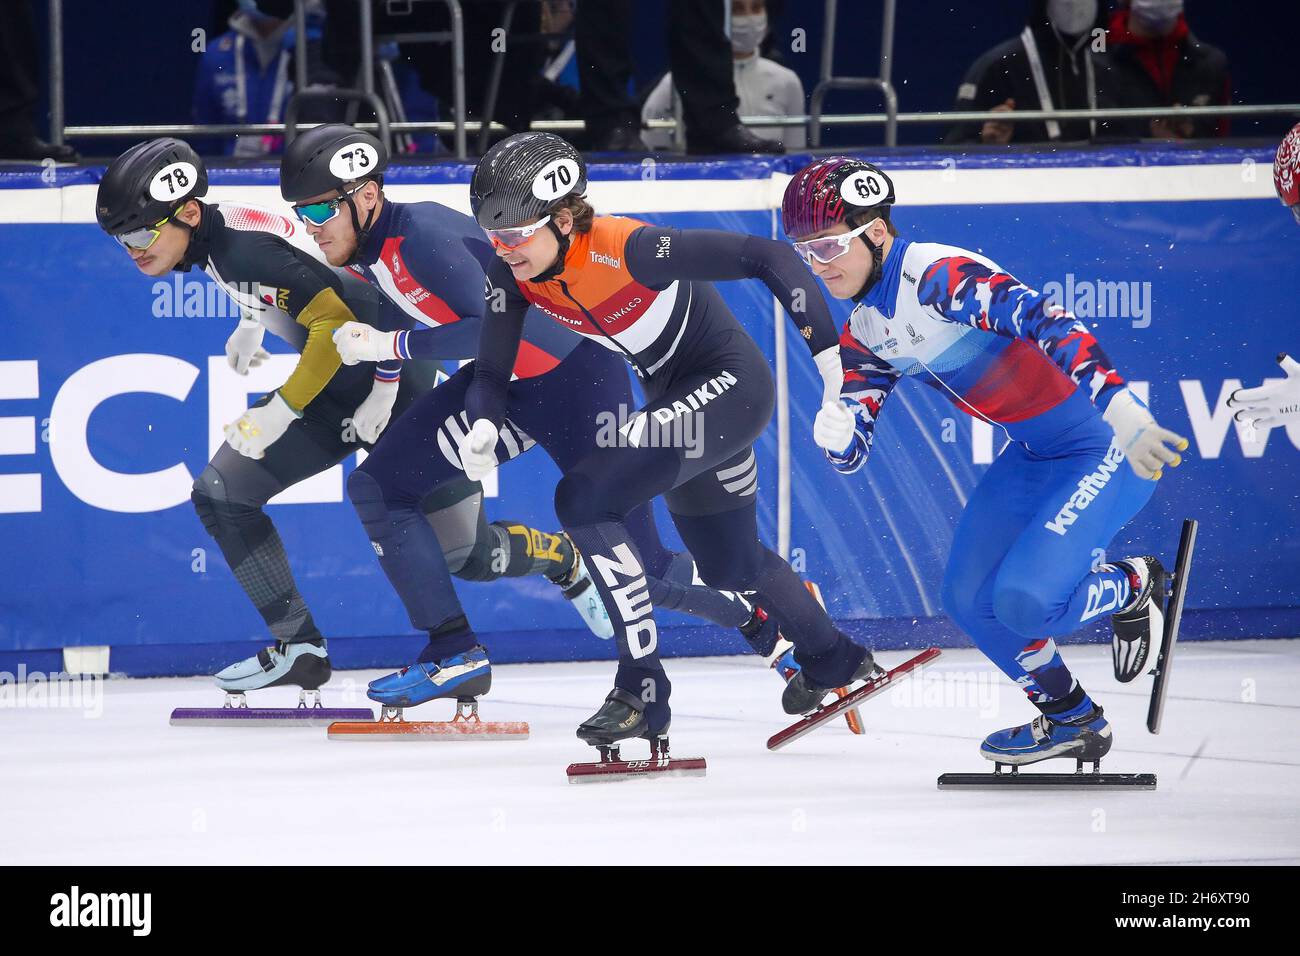 DEBRECEN, HUNGARY - NOVEMBER 18: Kota Kikuchi of Japan, Quentin Fercoq of France, Melle van 't Wout of The Netherlands, Daniil Eibog of Russia competing during the ISU World Cup Short Track Speed Skating at Fonix Arena on November 18, 2021 in Debrecen, Hungary (Photo by Istvan Derencsenyi/Orange Pictures) Stock Photo